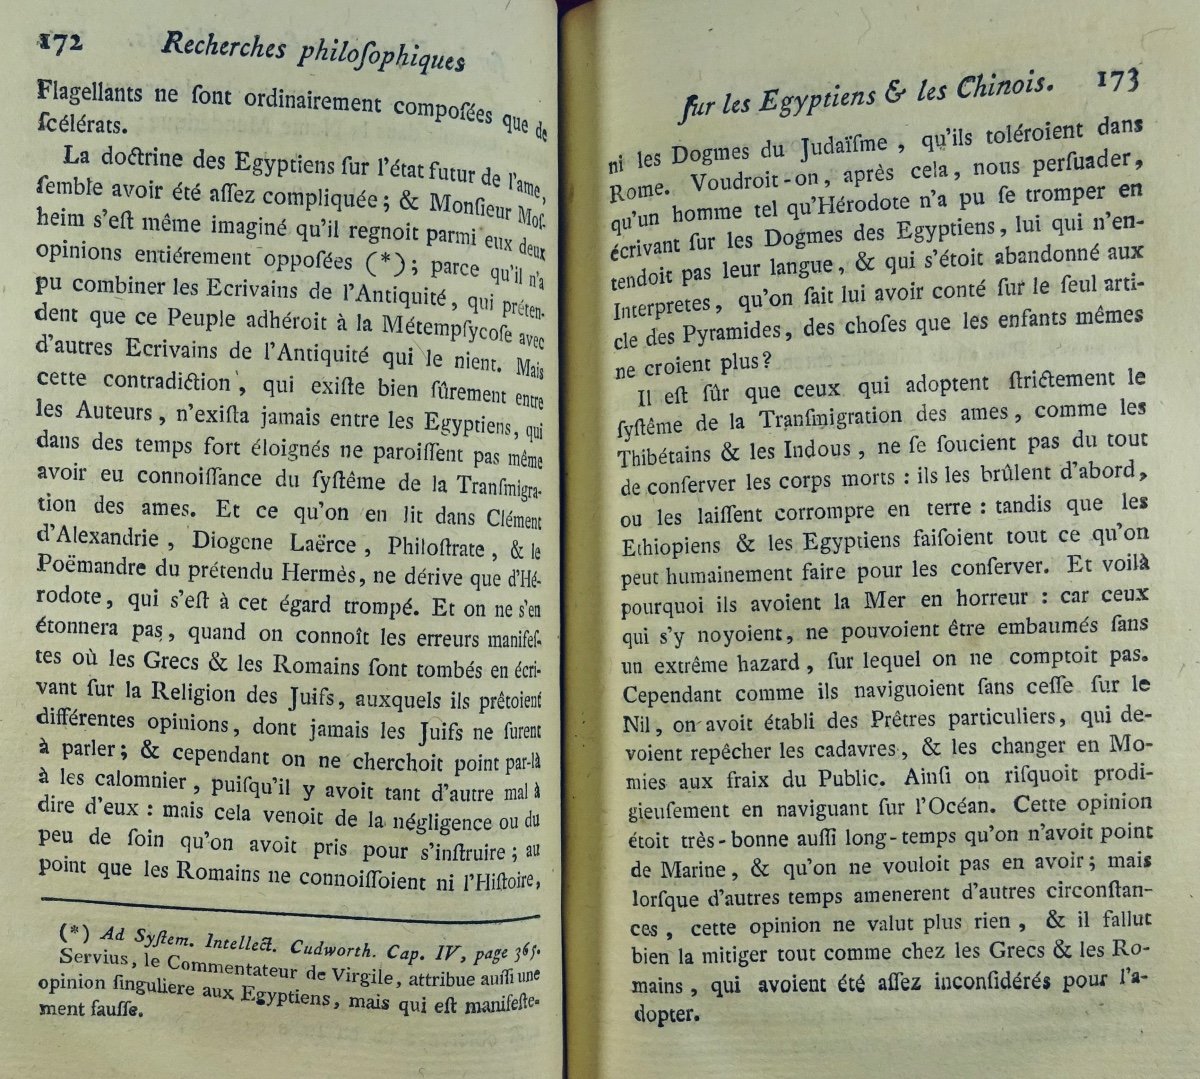 [pauw (cornelius De)] - Philosophical Researches On The Egyptians And The Chinese. 1773.-photo-2